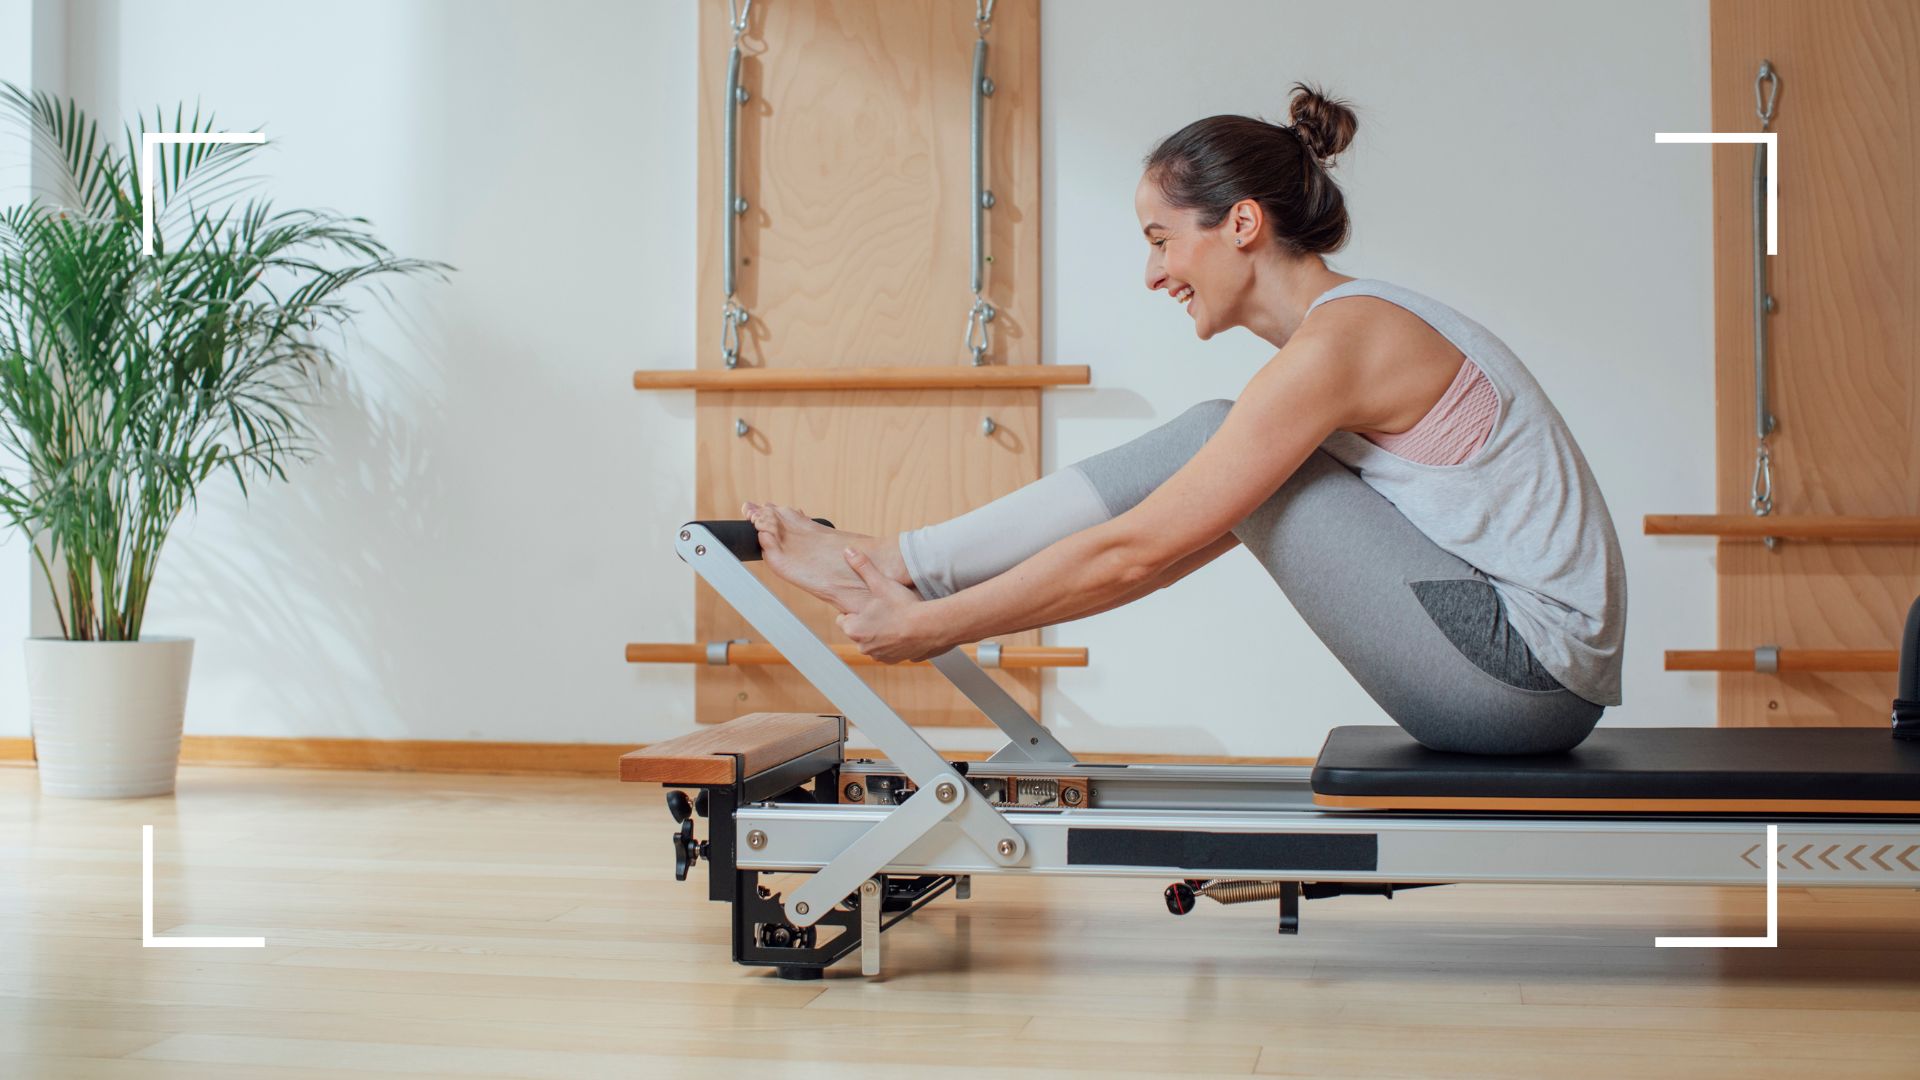 What is Reformer Pilates and why is it so effective?